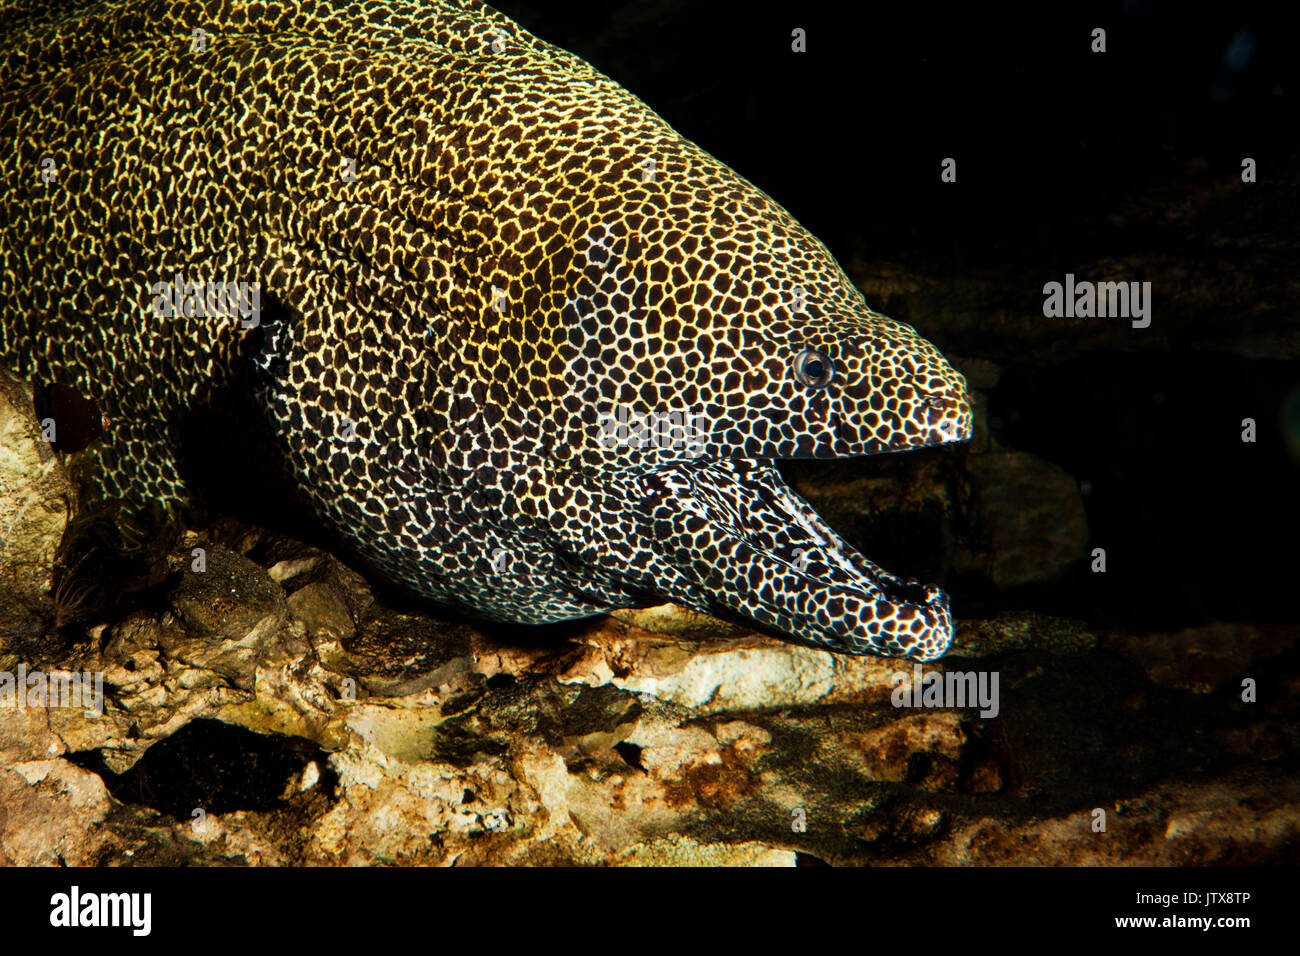 HONEYCOMB MORAY EEL gymnothorax favagineus IN SOUTH AFRICA, ADULT WITH OPENED MOUTH Stock Photo